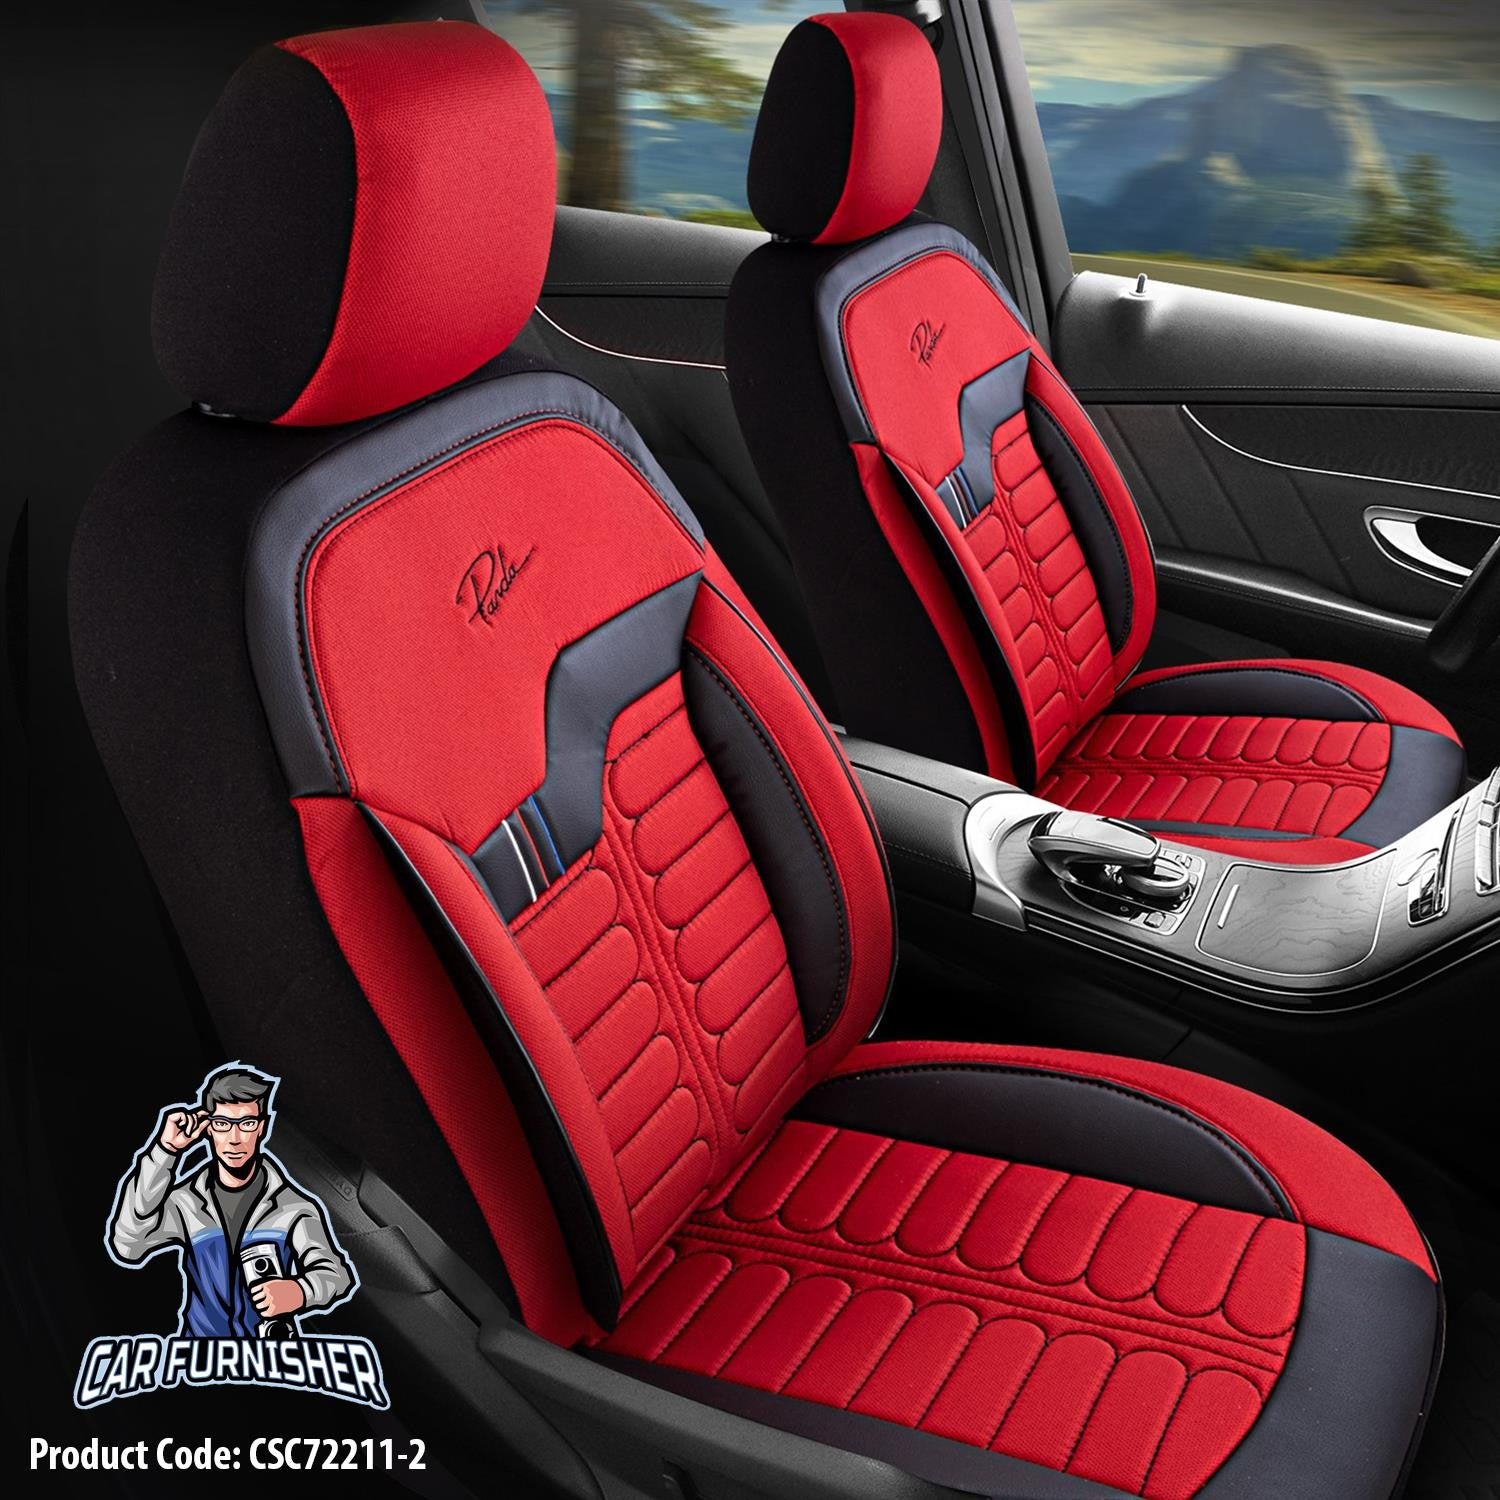 Car Seat Cover Set - London Design Red 5 Seats + Headrests (Full Set) Leather & Jacquard Fabric